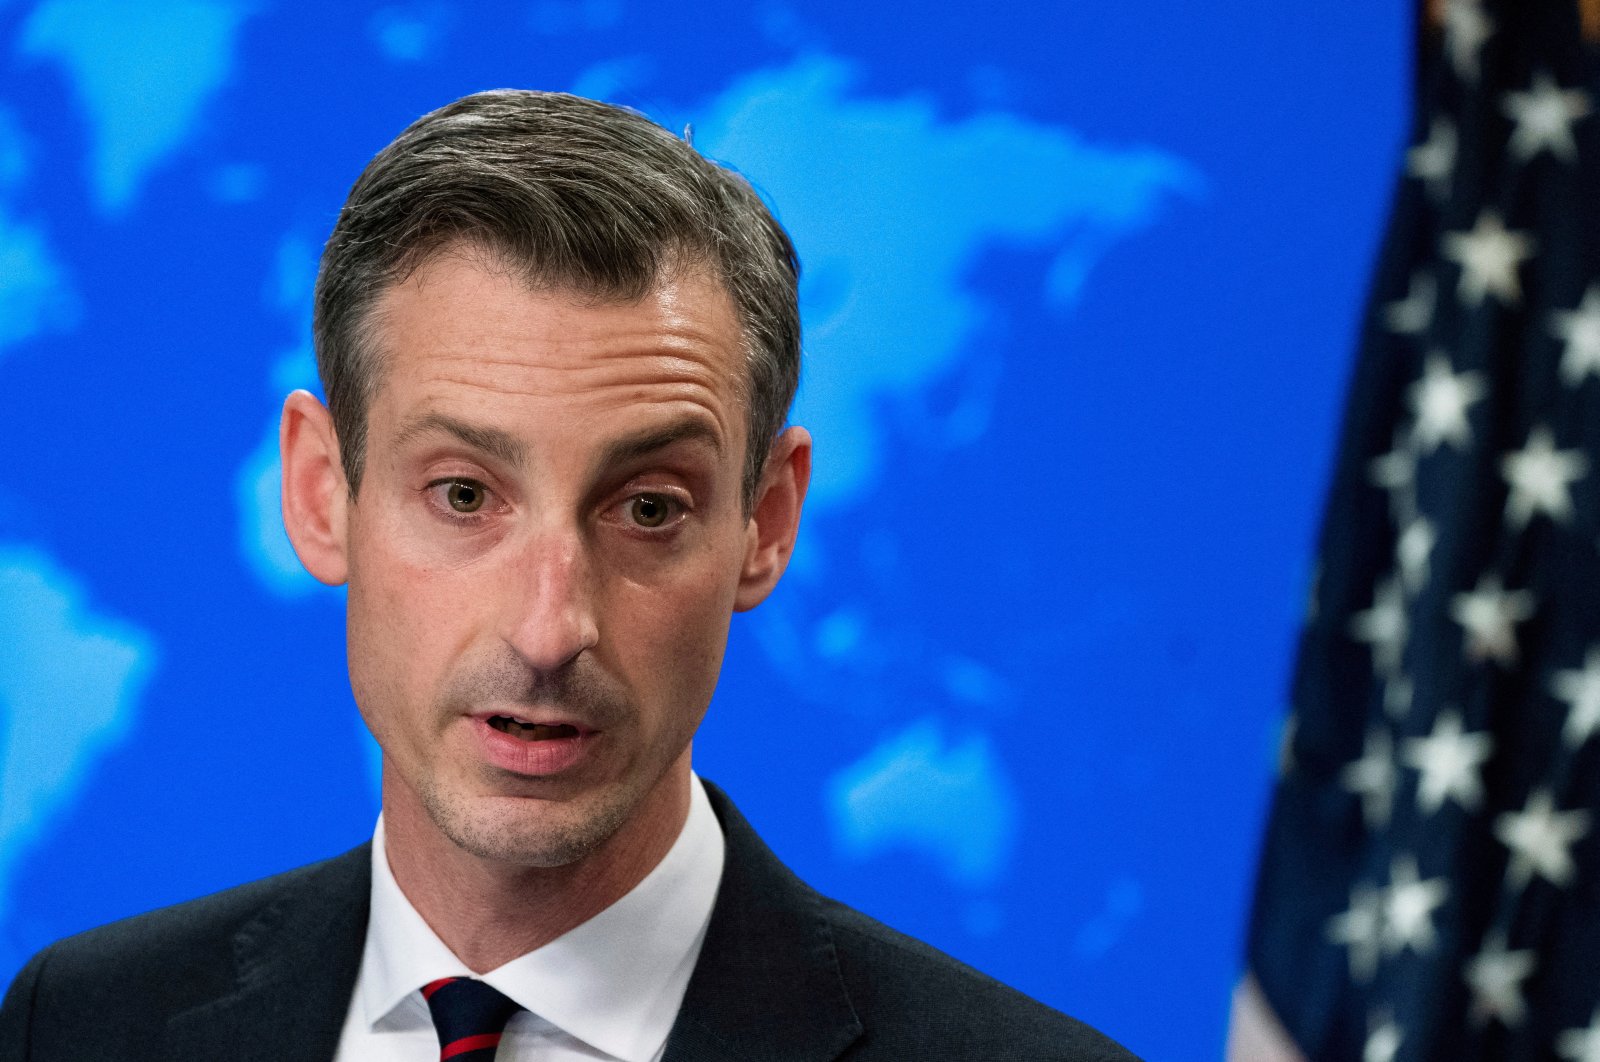 U.S. State Department spokesperson Ned Price speaks during a news conference in Washington, U.S. March 10, 2022. (Reuters File Photo)